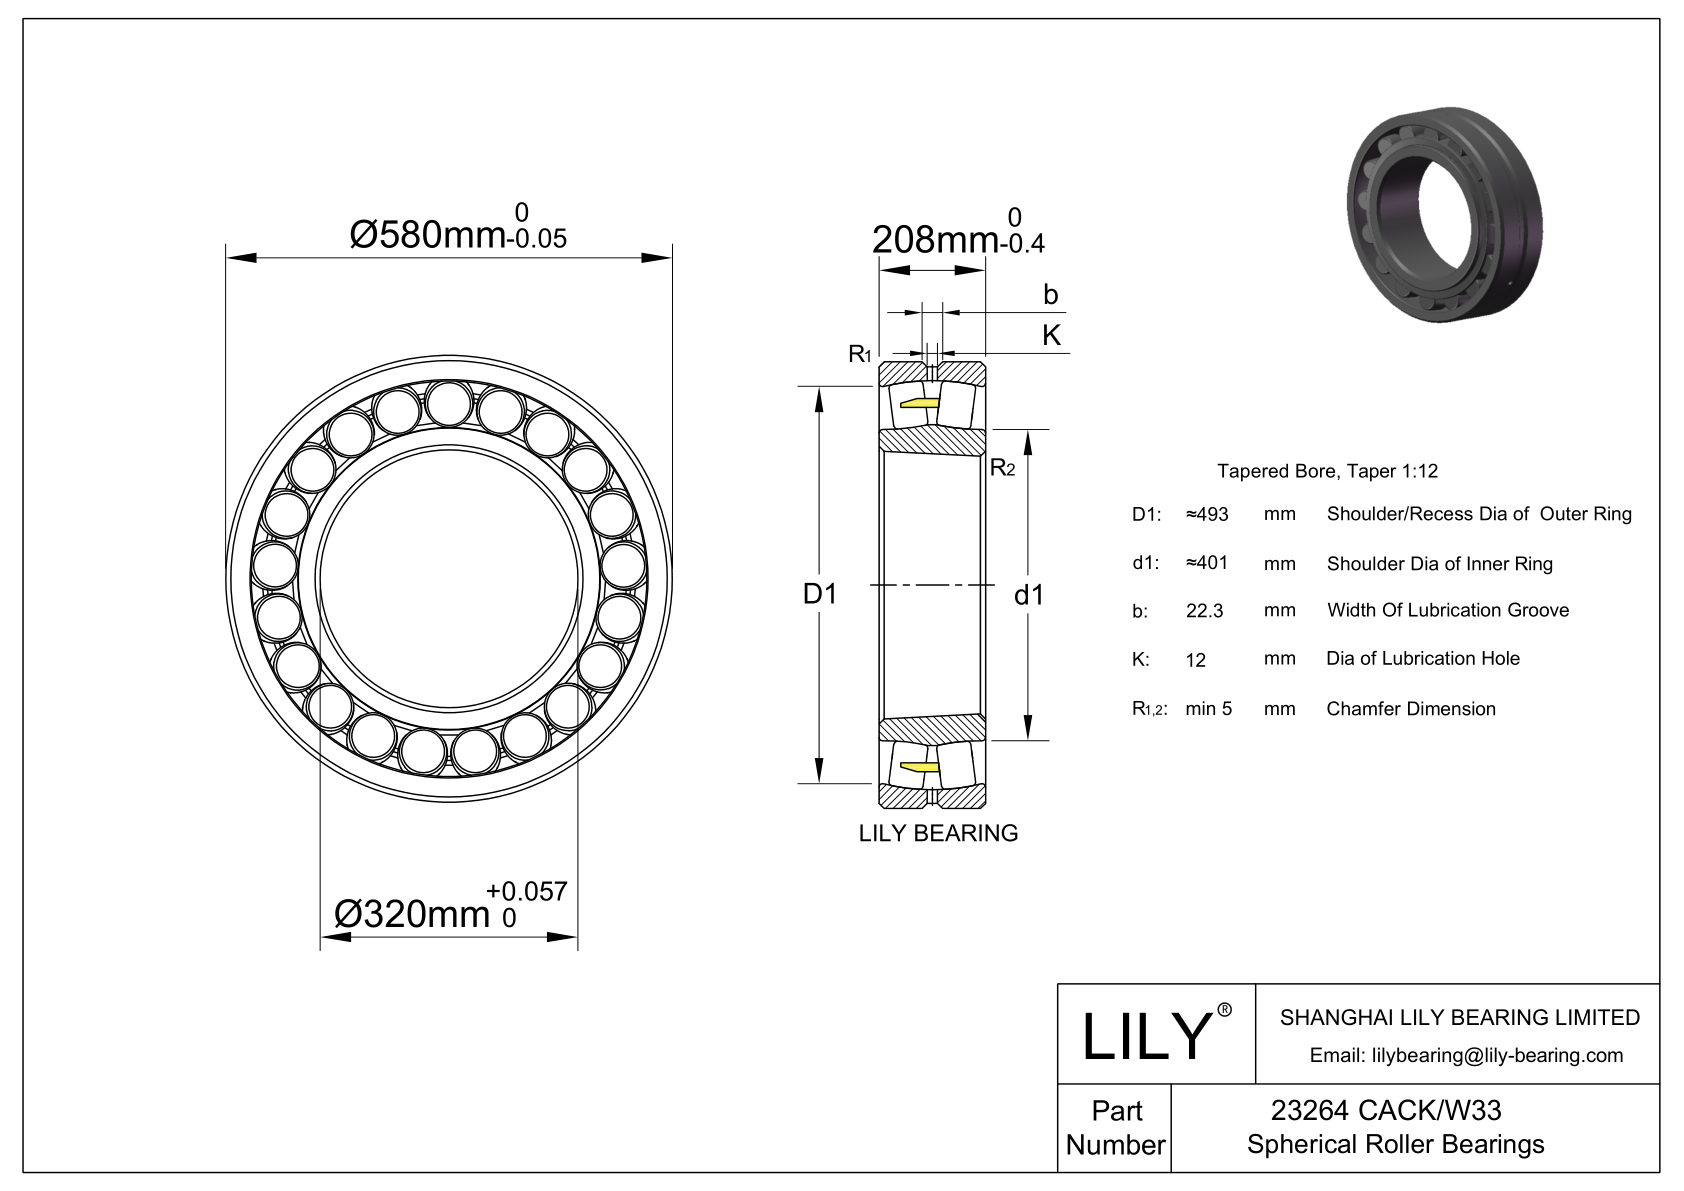 23264 CACK/W33 Double Row Spherical Roller Bearing cad drawing